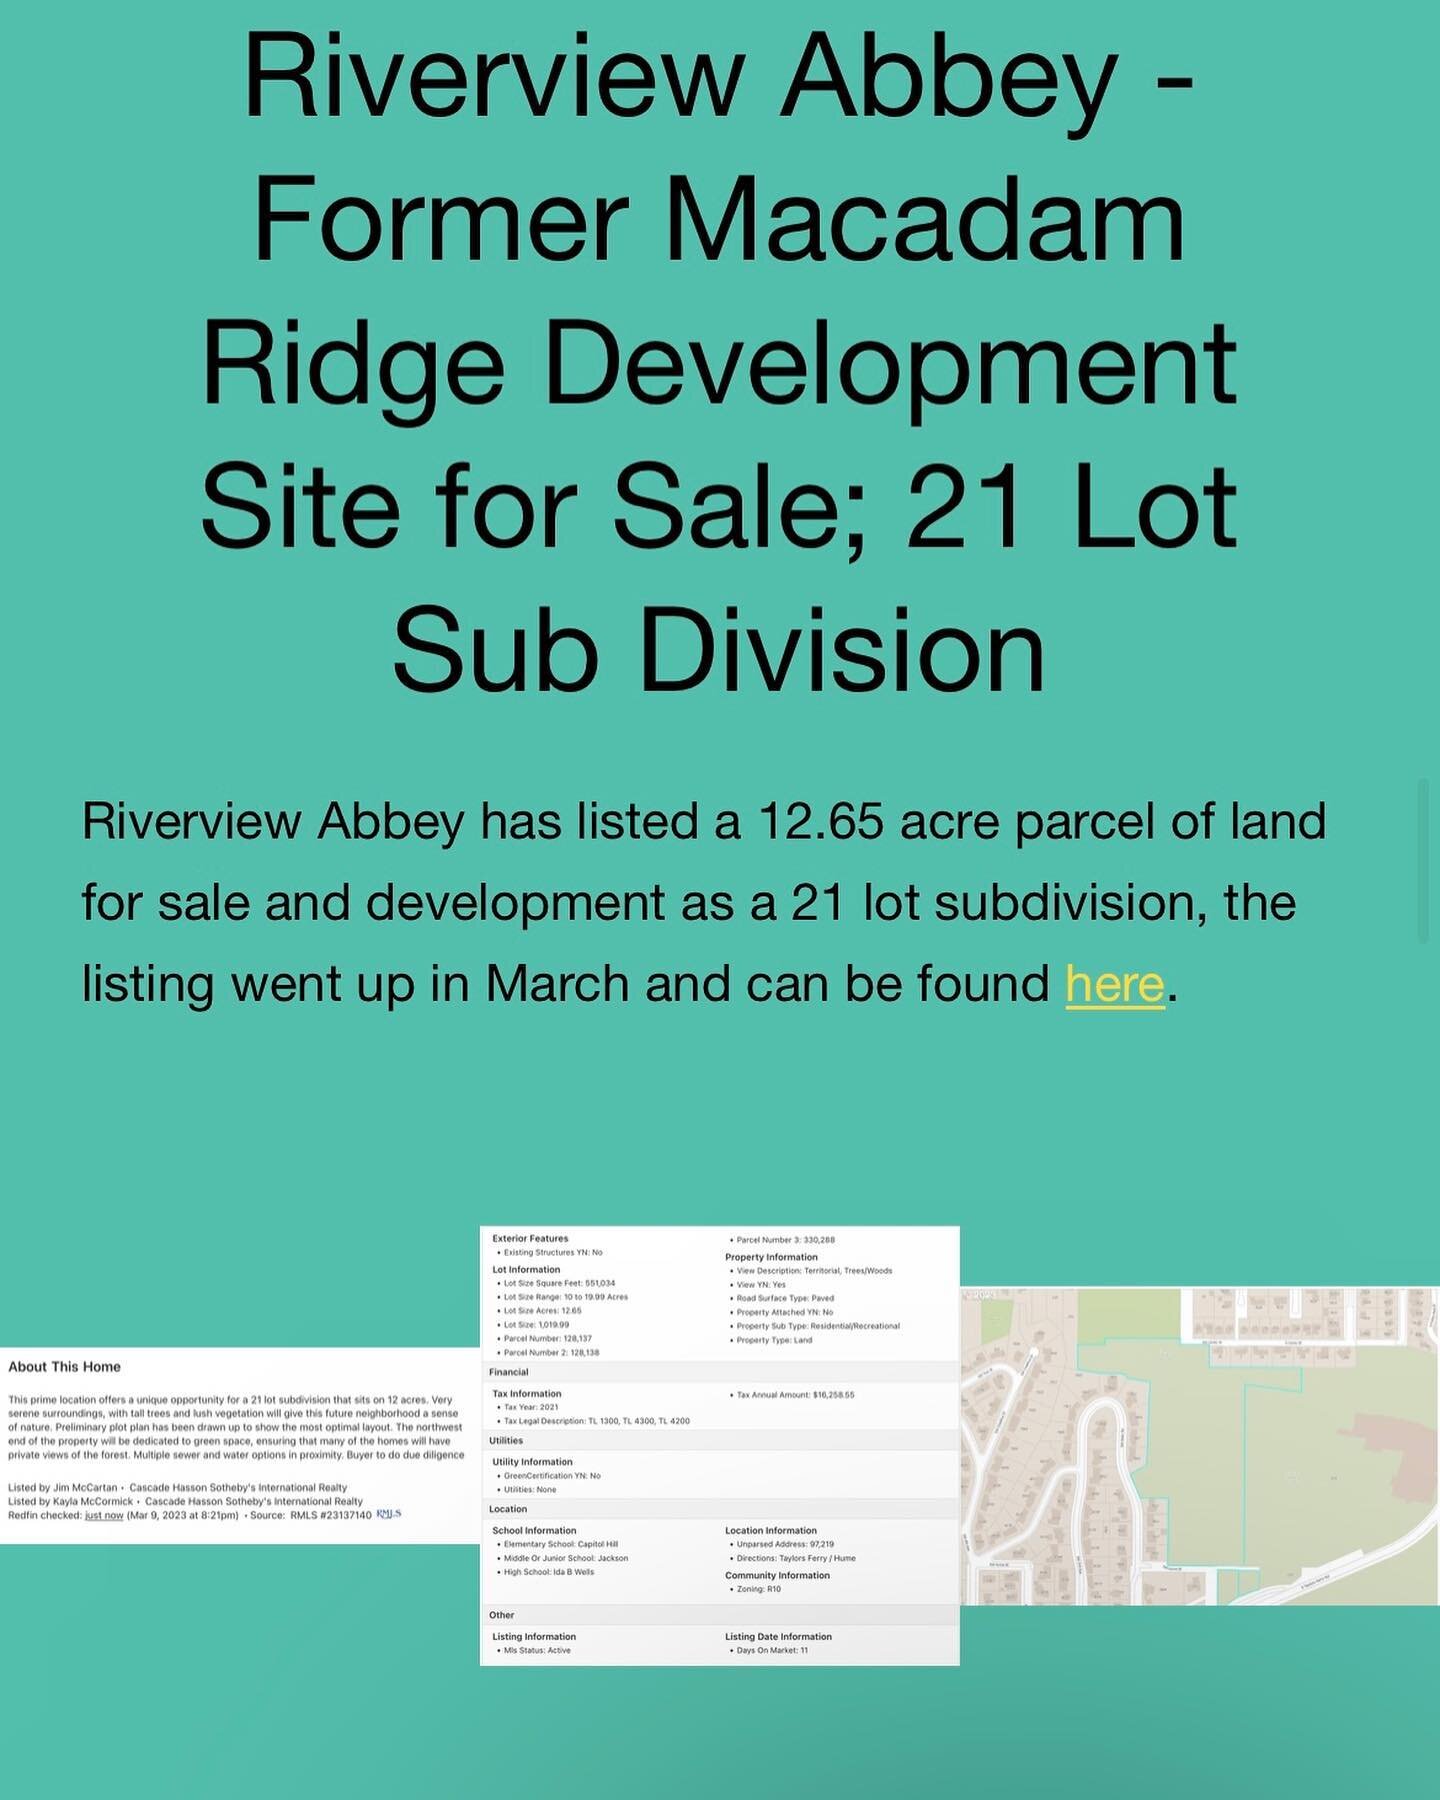 Riverview Abbey has listed a 12 acre lot for sale for a 21 lot subdivision 🏘️ - the former Macadam Ridge development site that was not developed in previous form denied by Portland City Council, the Land Use Board of Appeals as well as Oregon Court 